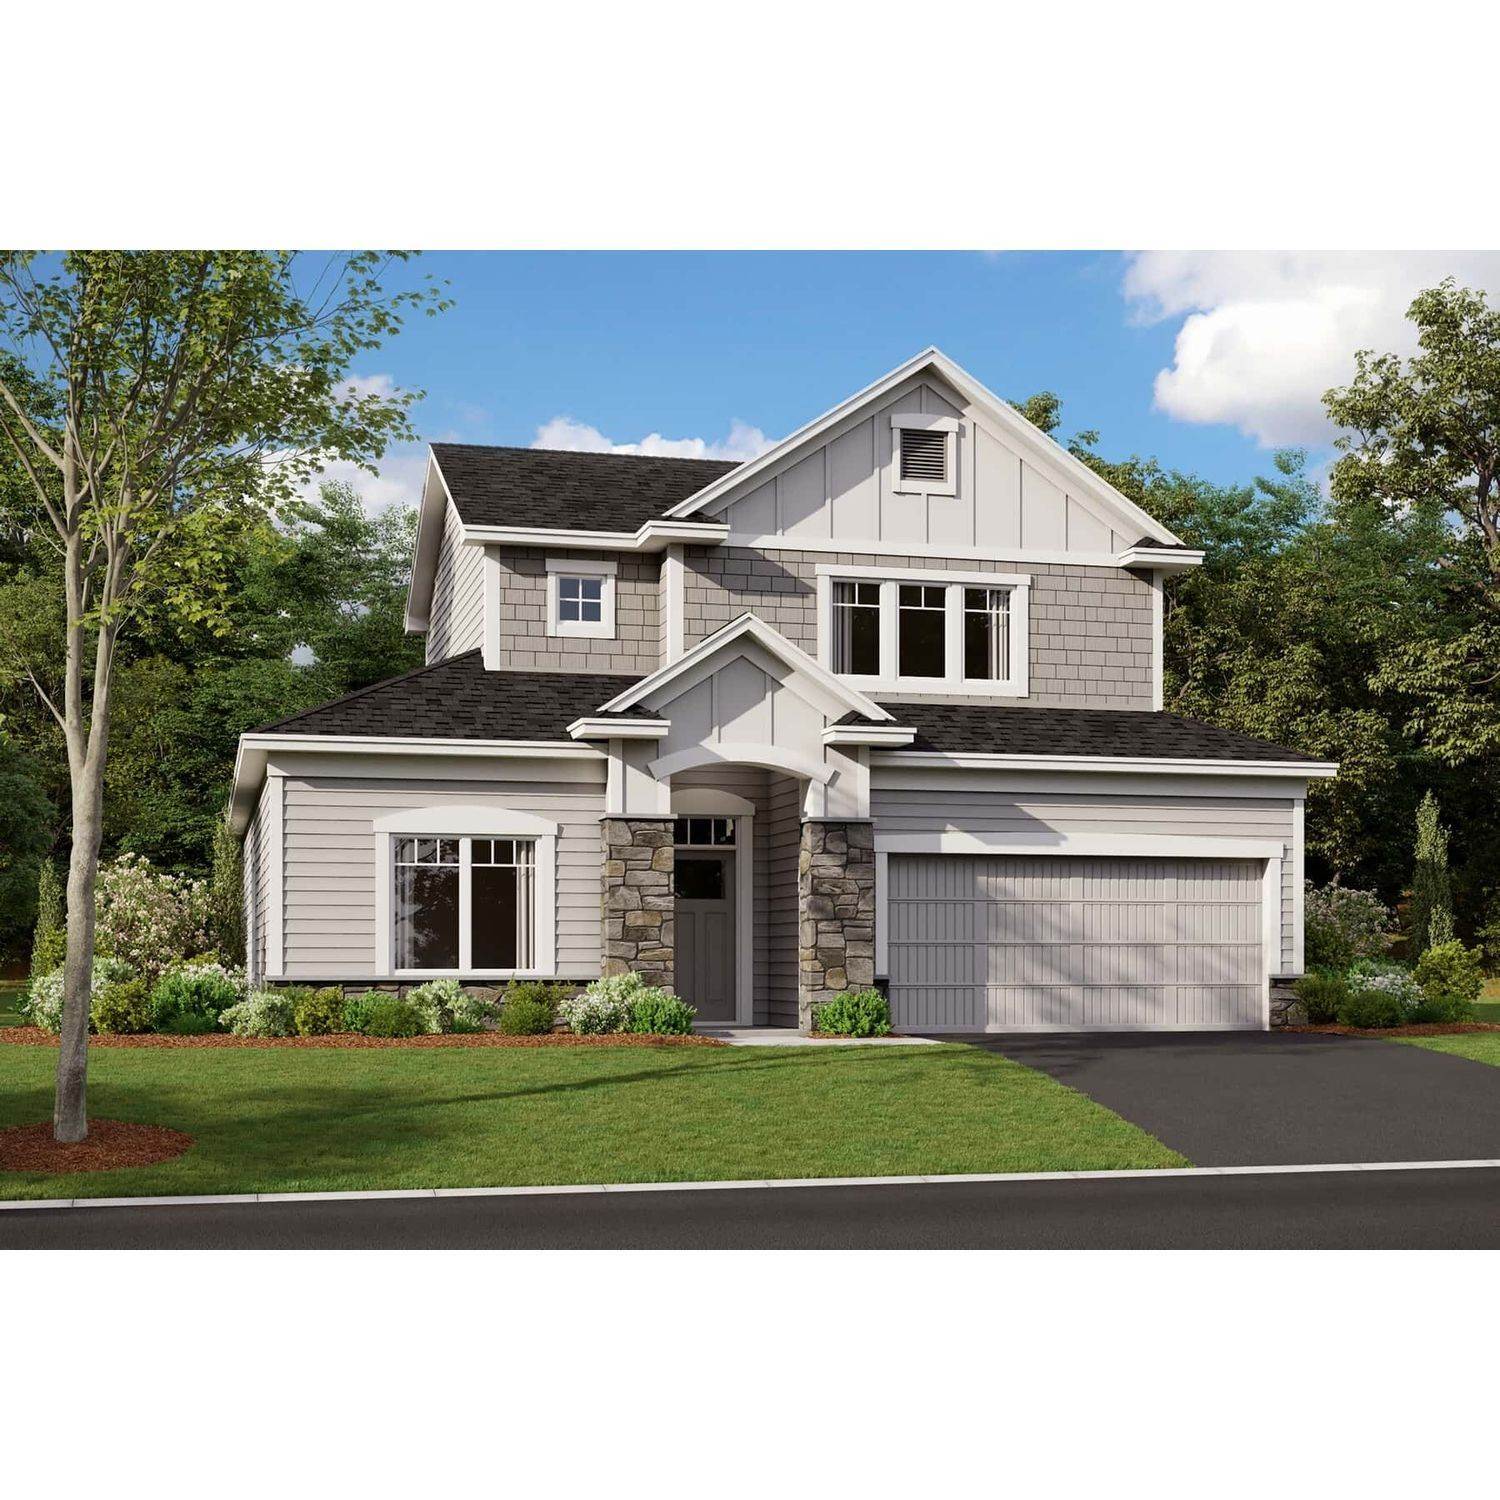 Single Family for Sale at Minnetrista, MN 55331